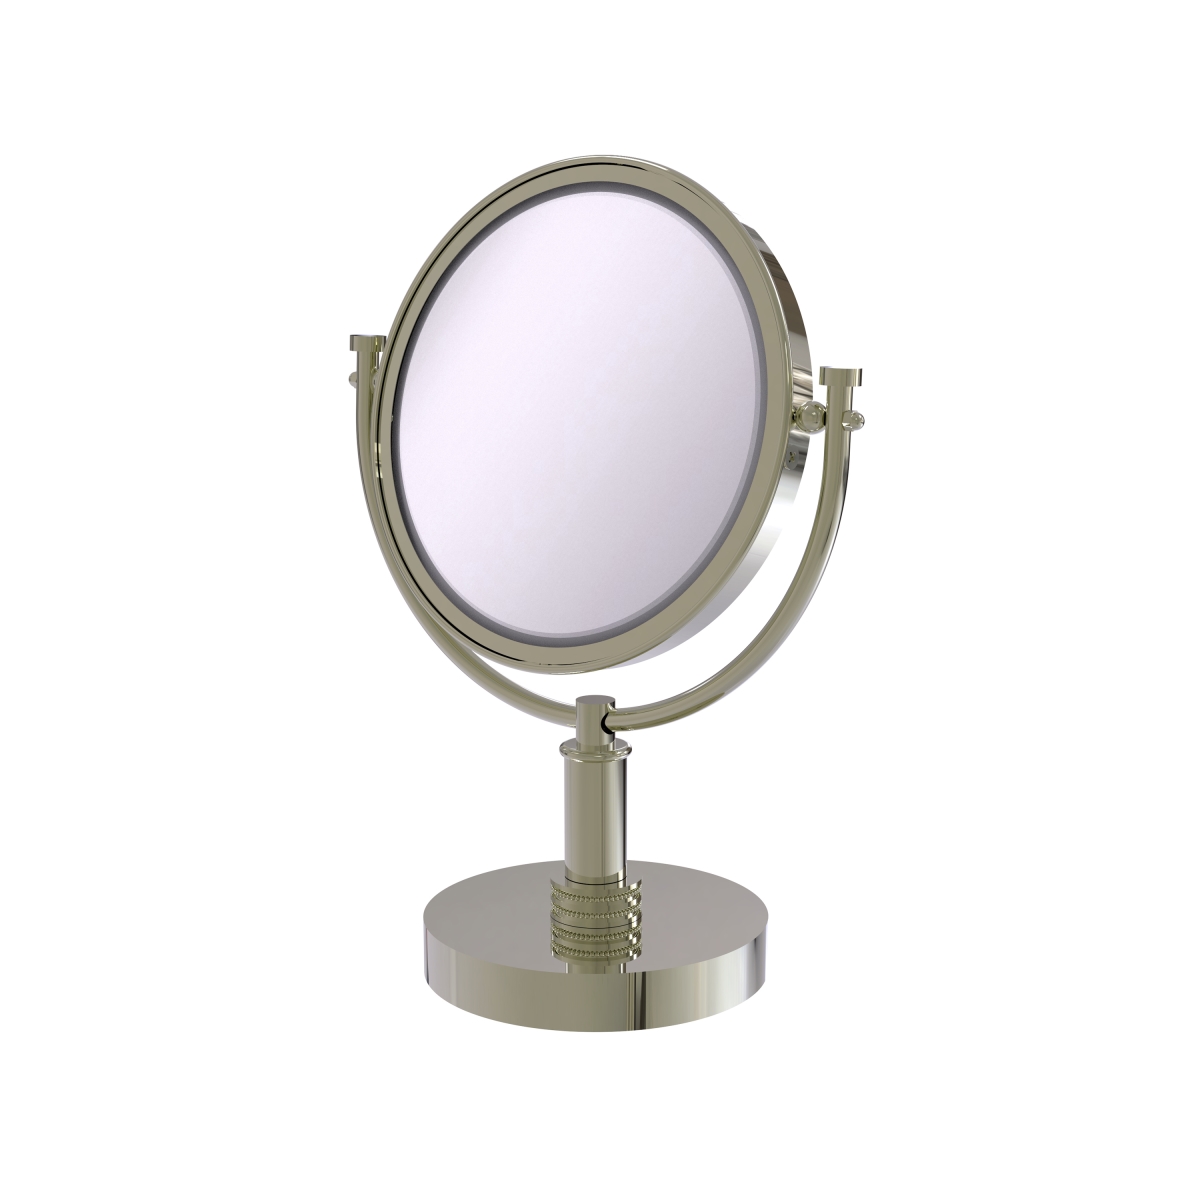 Picture of Allied Brass DM-4D-2X-PNI 8 in. Vanity Top Make-Up Mirror 2X Magnification, Polished Nickel - 15 x 8 x 8 in.